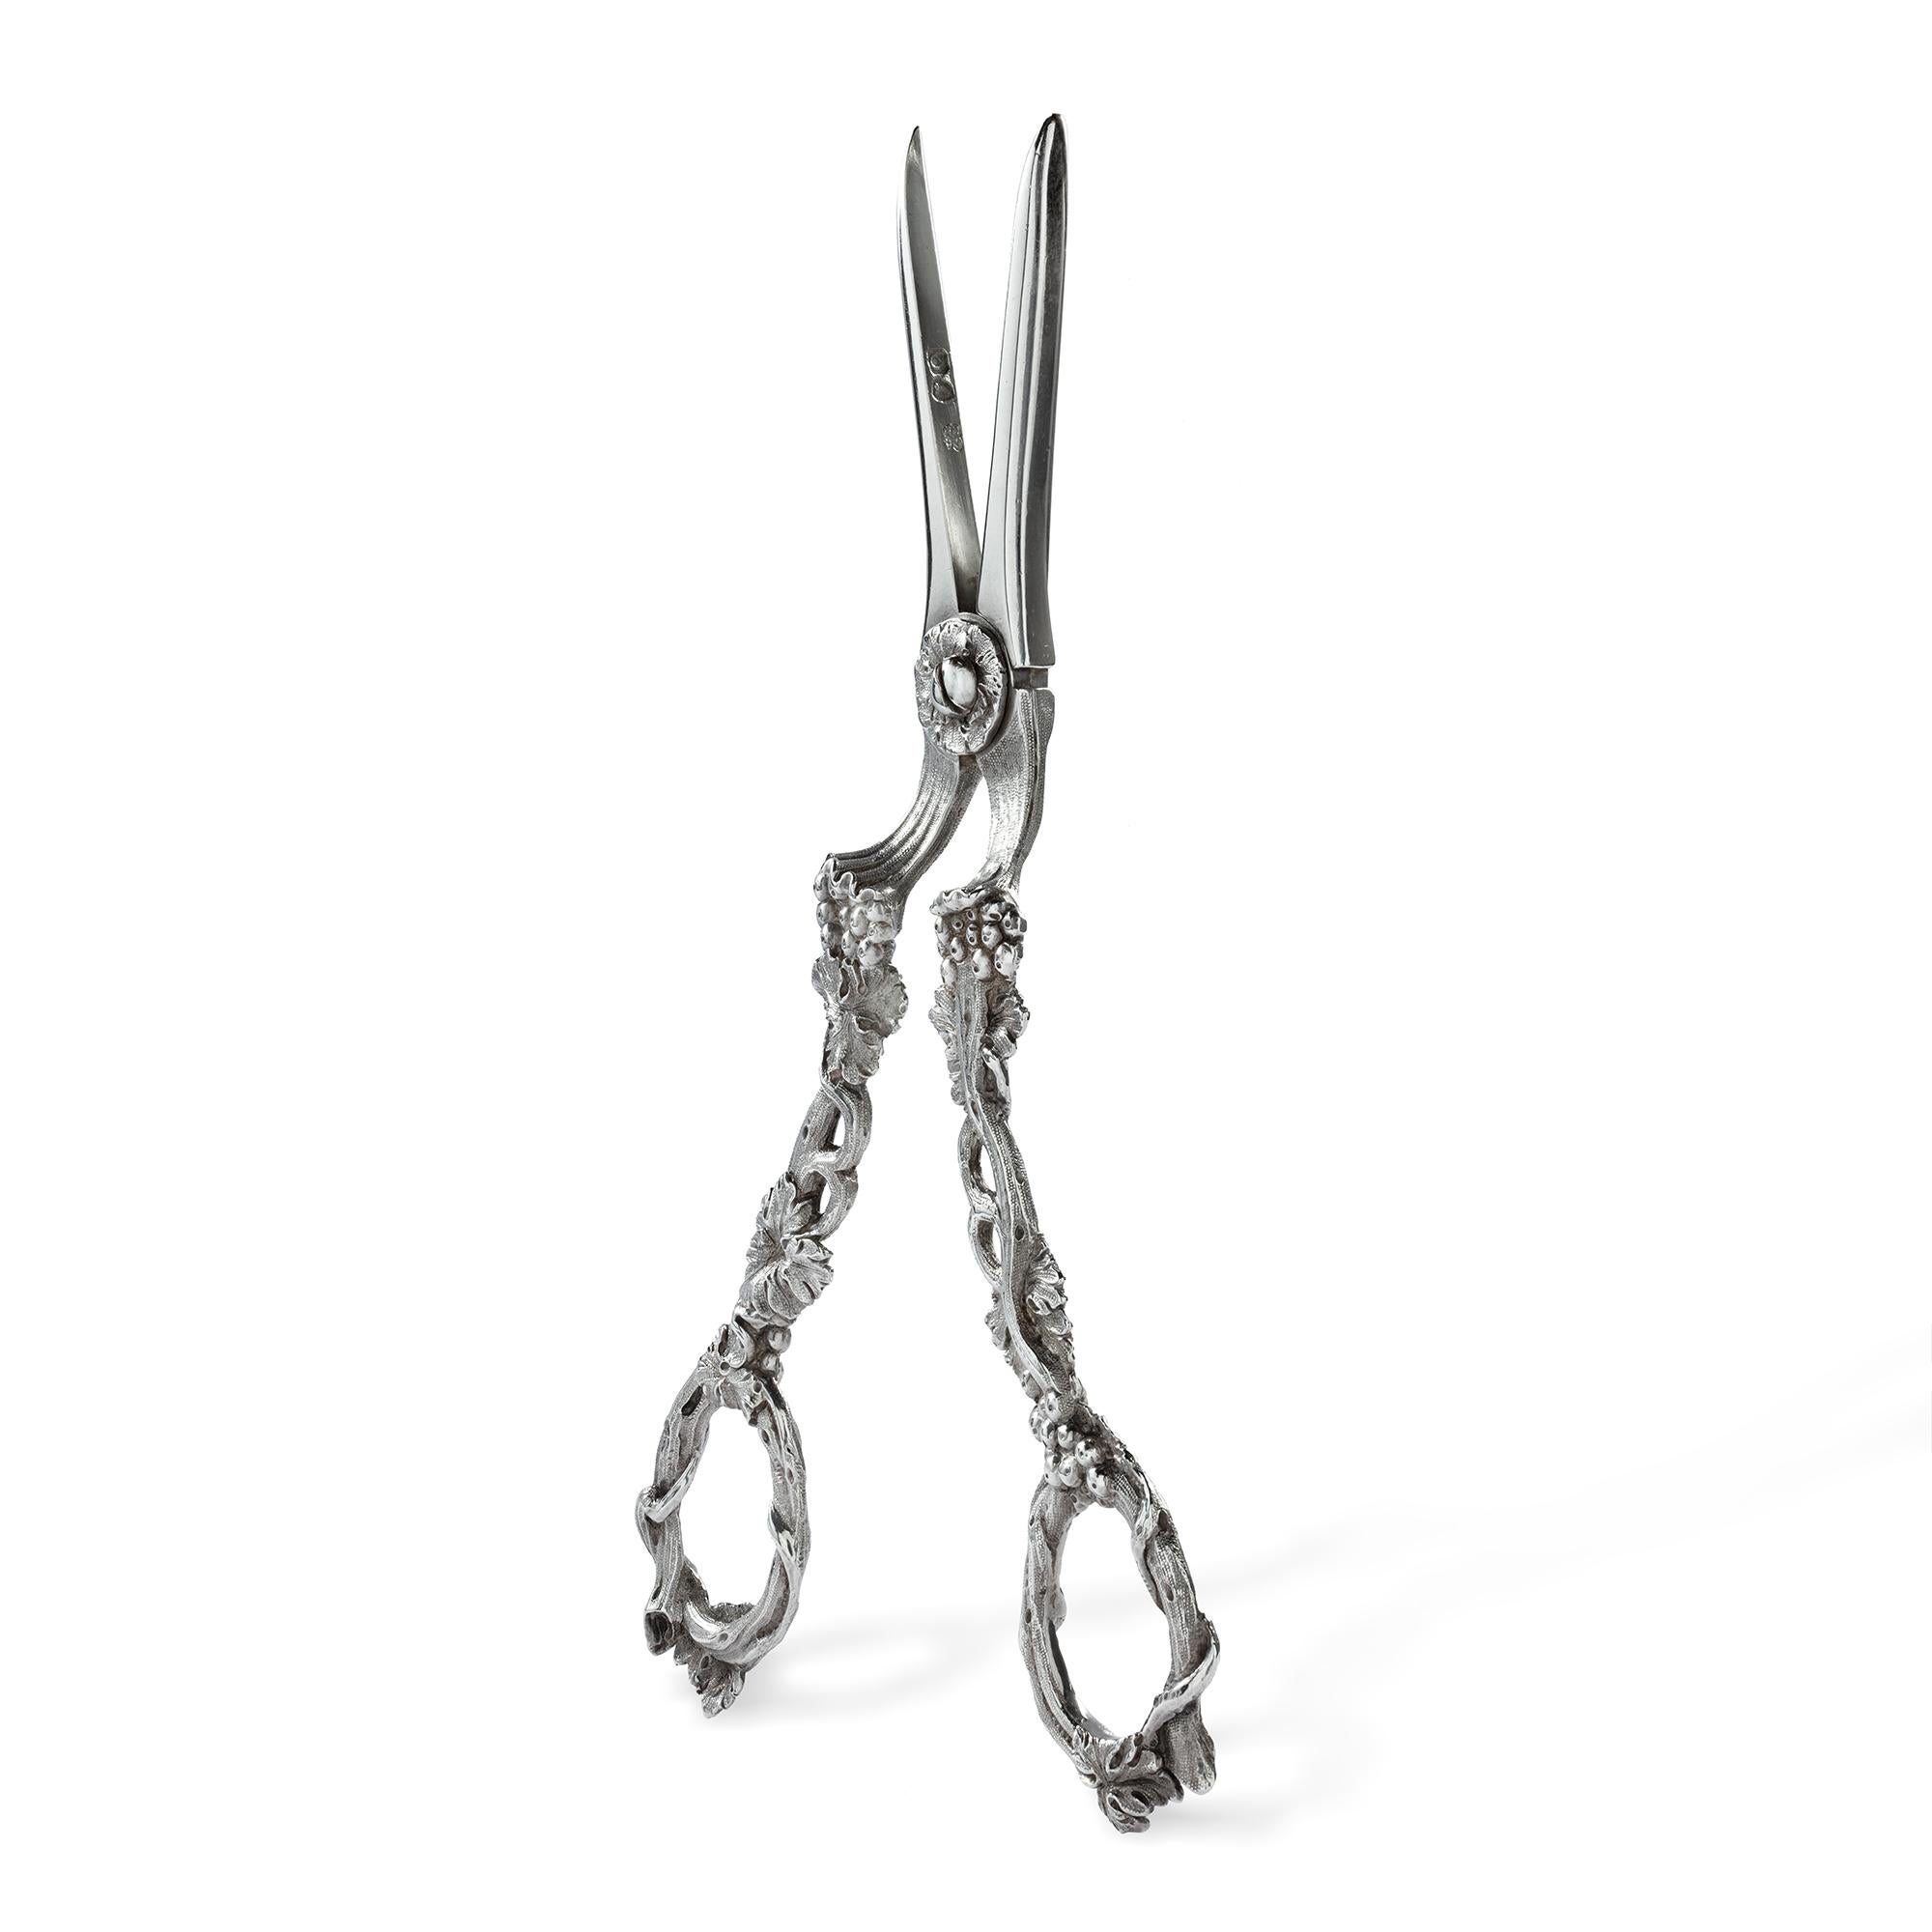 A pair of George IV silver grape scissors, with cast grape and vine handles, 19cms long, hallmarked London 1829, maker Charles Reily & George Storer.

Should you choose to make this purchase we would be delighted to send it to you in a gift-wrapped